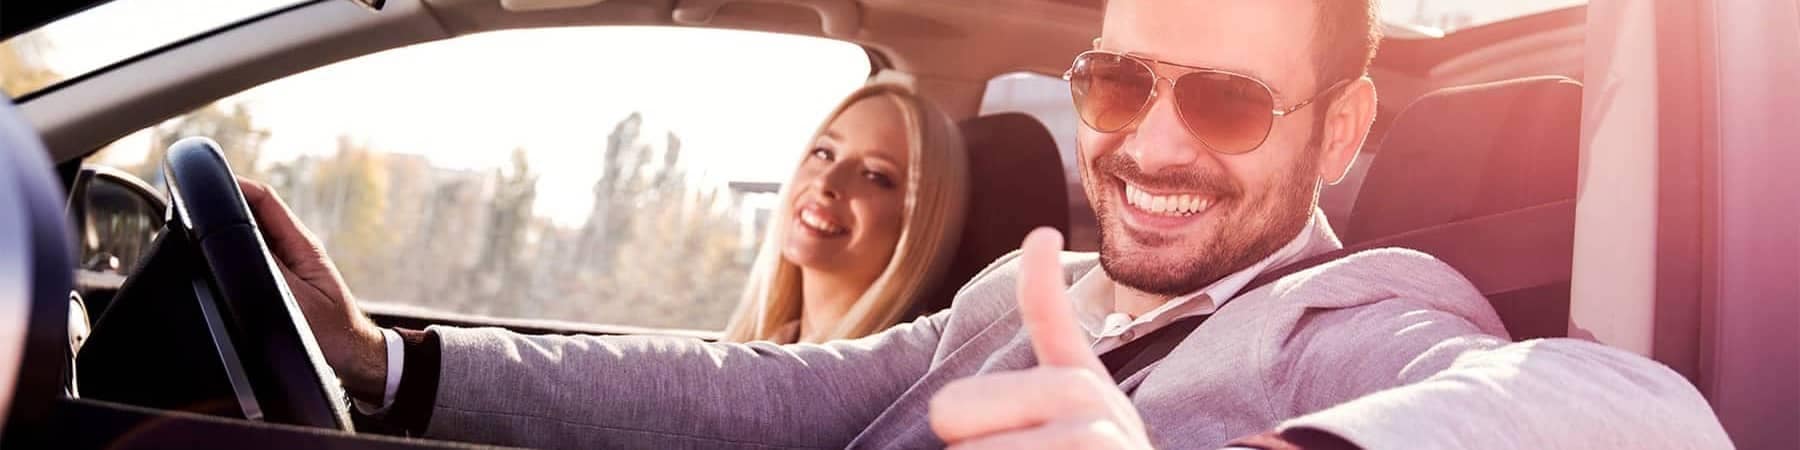 Man giving thumbs up while driving car